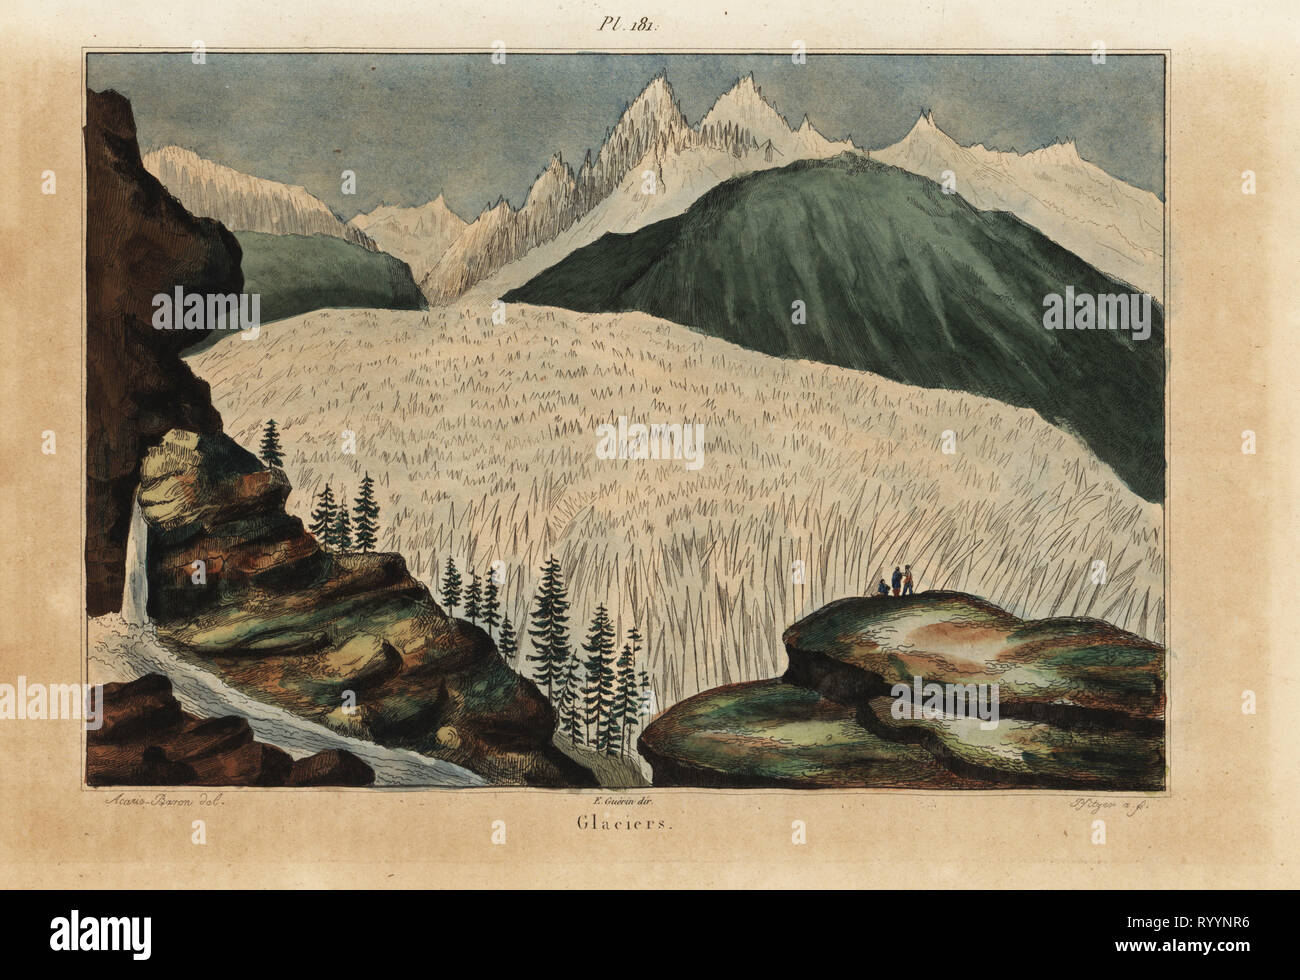 Glaciers in the Alps. Handcoloured steel engraving by Pfitzer after an illustration by A. Carie Baron from Felix-Edouard Guerin-Meneville's Dictionnaire Pittoresque d'Histoire Naturelle (Picturesque Dictionary of Natural History), Paris, 1834-39. Stock Photo